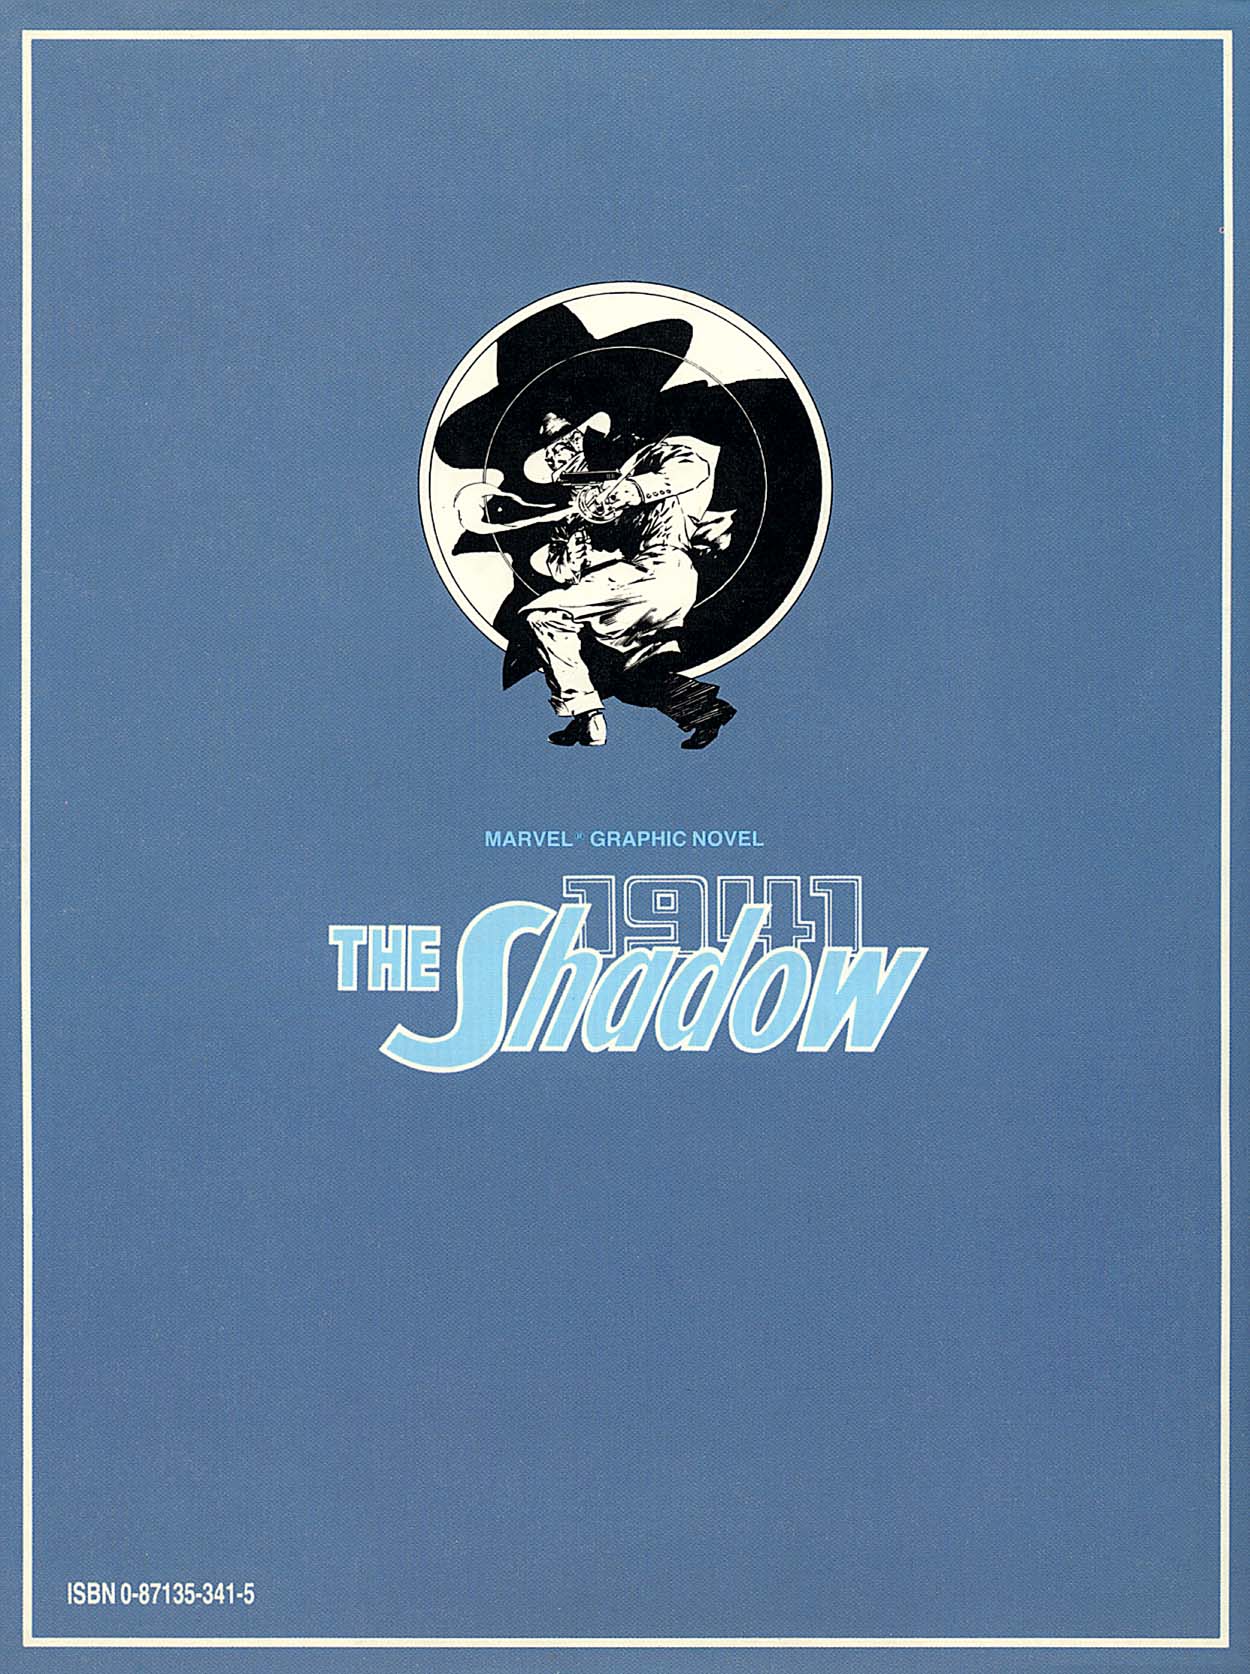 Read online Marvel Graphic Novel comic -  Issue #34 - The Shadow - Hitler's Astrologer - 68